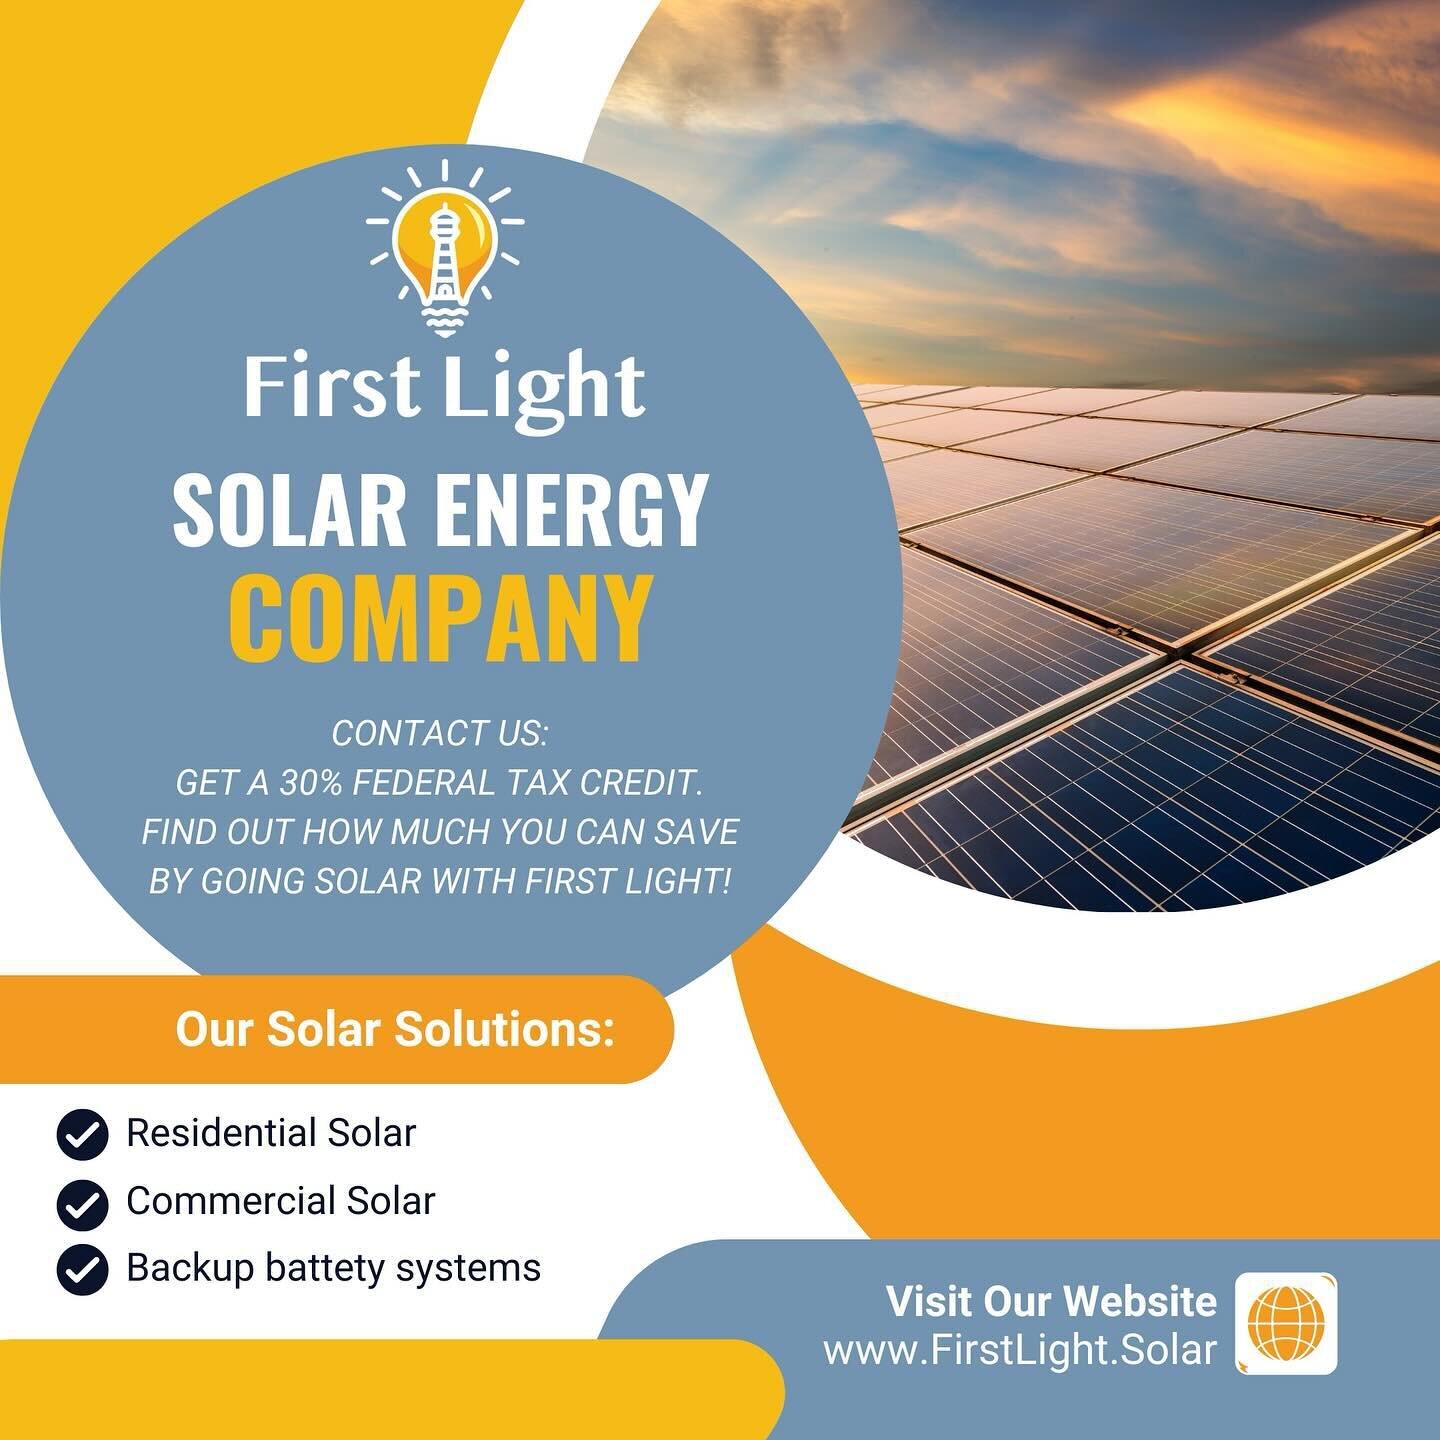 Check us out at www.firstlight.solar today and learn how you can save on your energy bill with Solar!